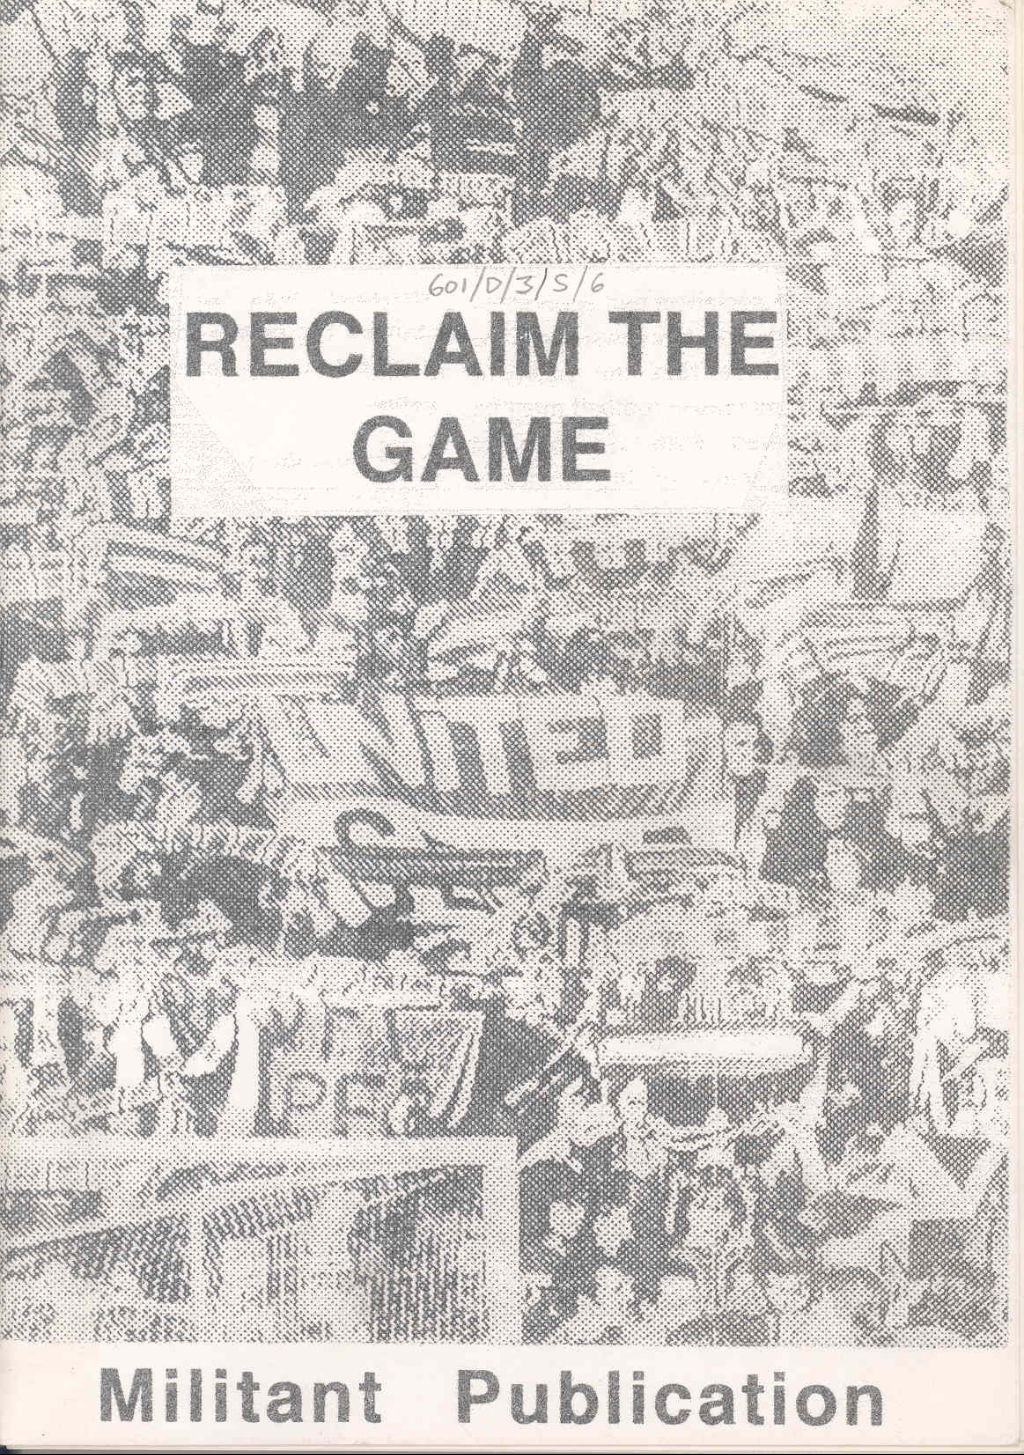 Reclaim the game, 1992